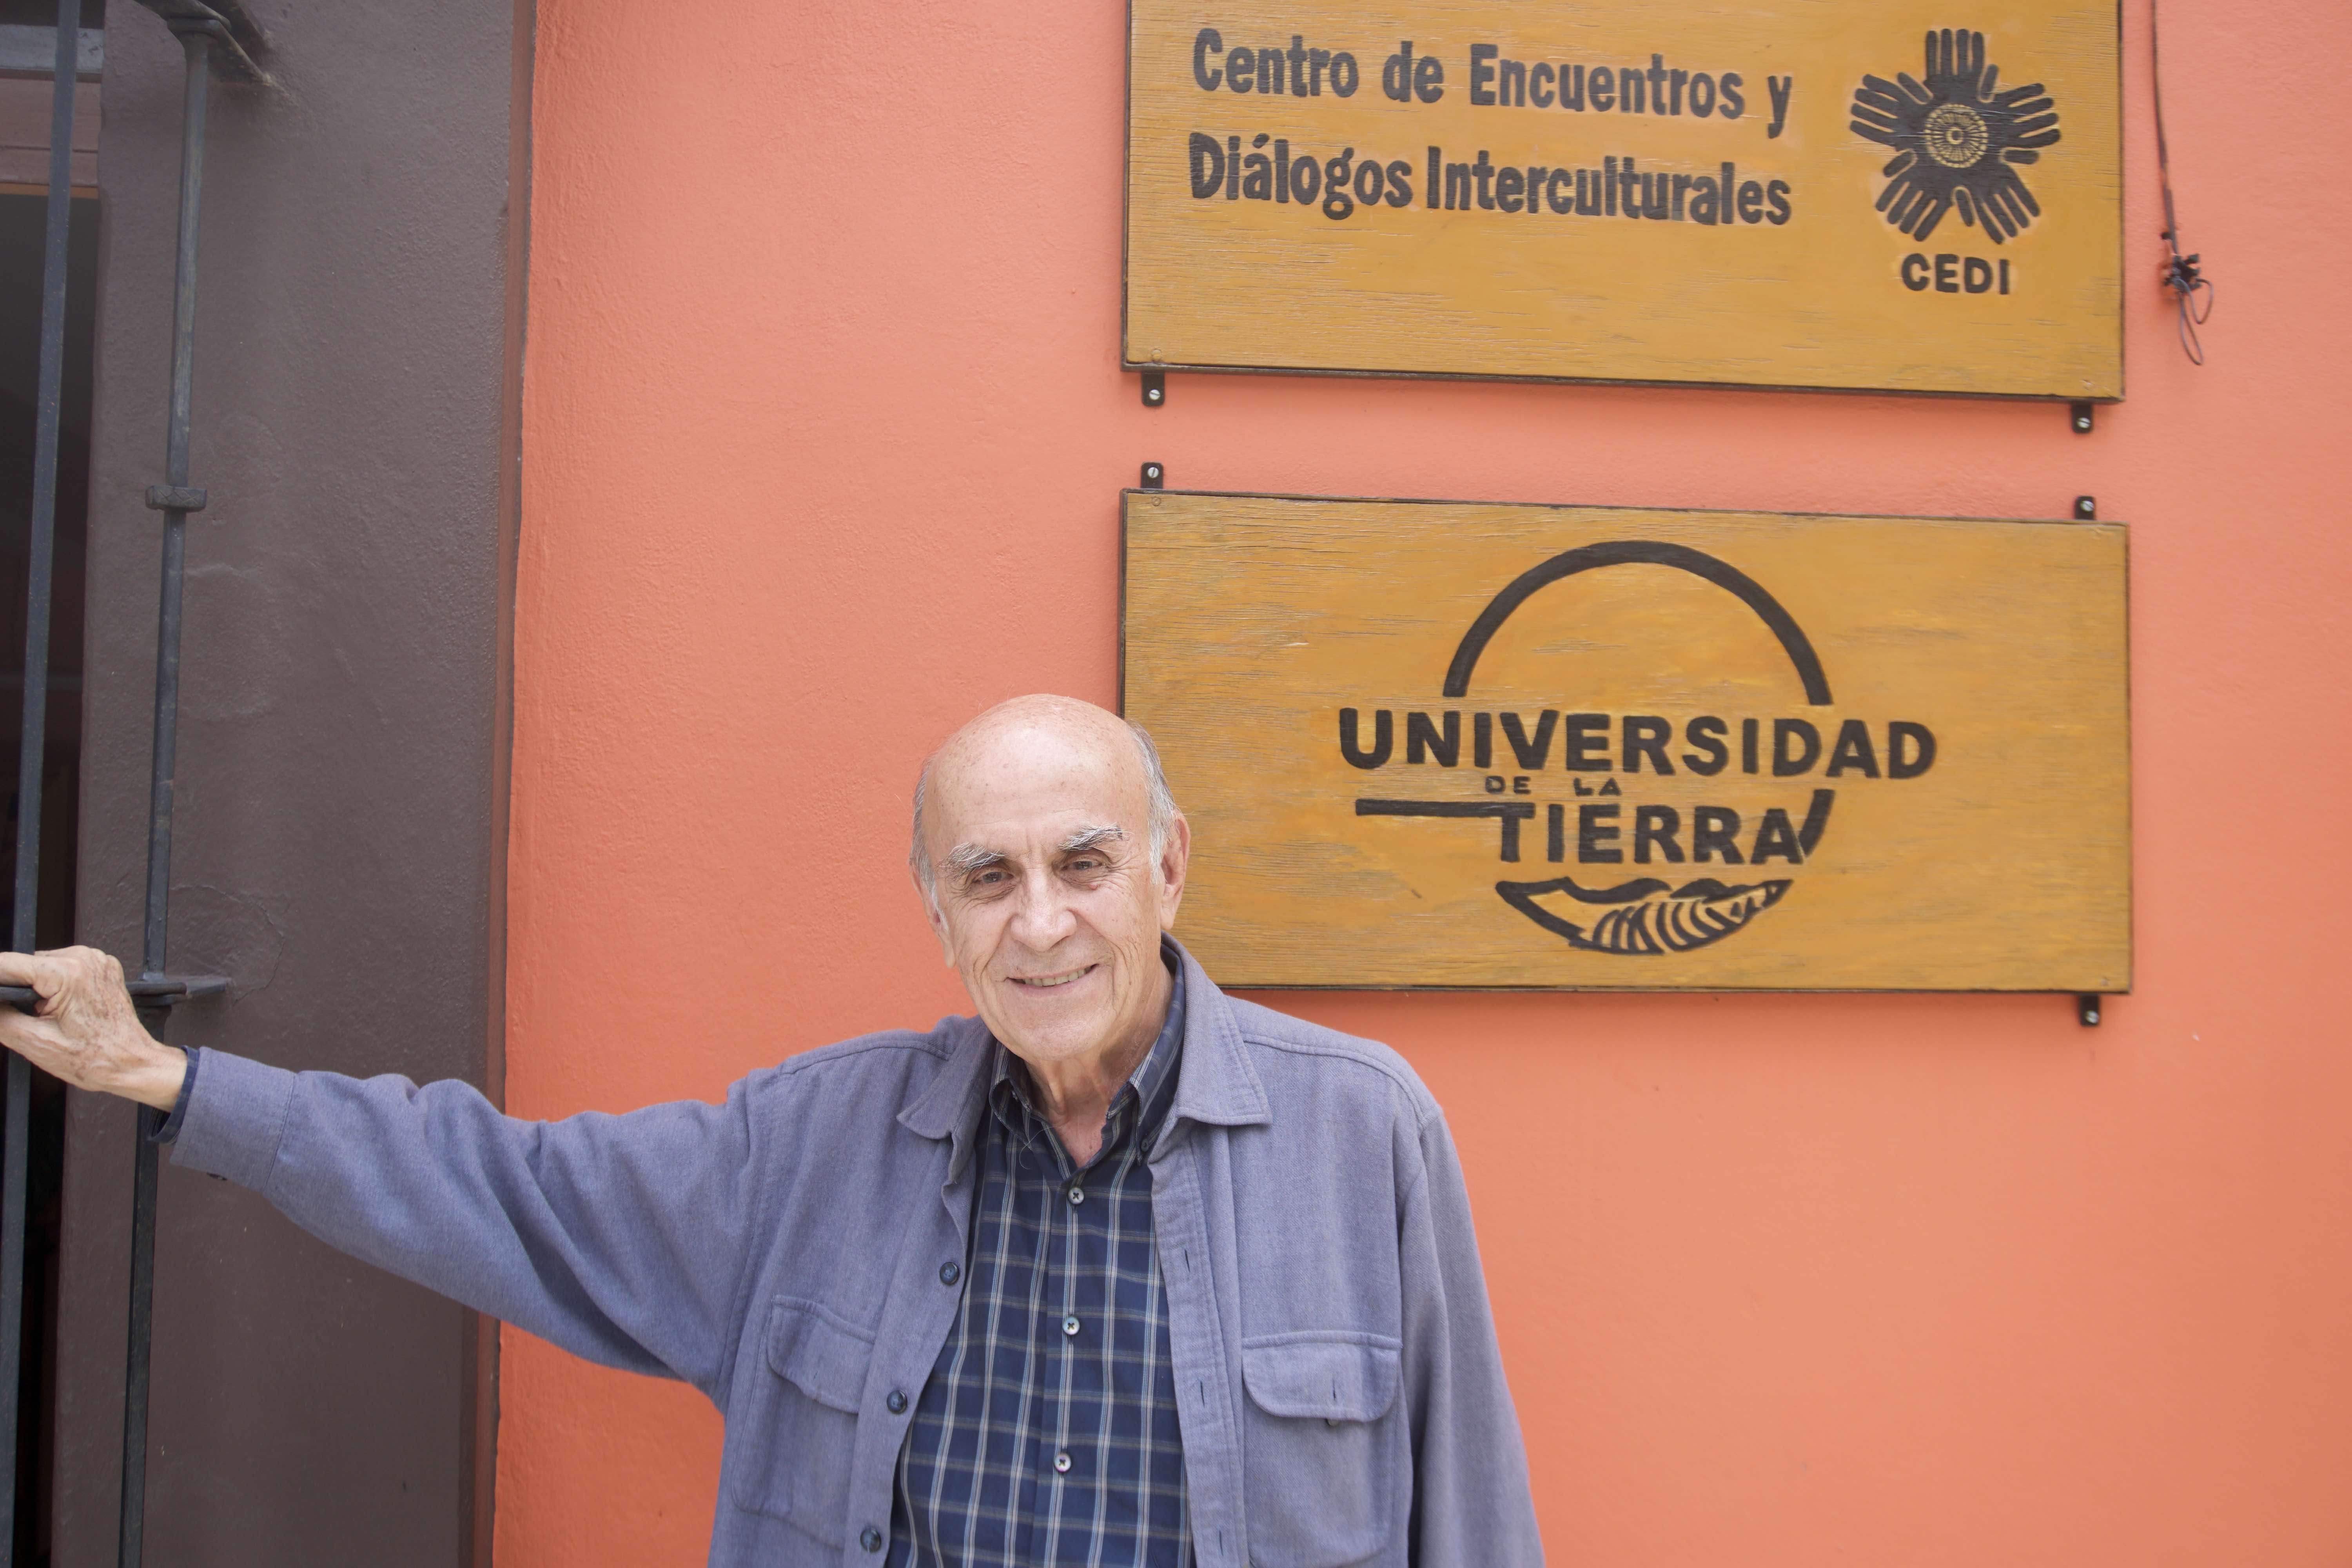 Gustavo Esteva before the Unitierra (short for Universidad de la Tierra, or "University of the Earth") the alternative education school he founded in the southern Mexican state of Oaxaca. Rooted in the radical educational philosophy of Brazilian philosopher Paolo Freire, Esteva has helped develop close ties to the Zapatista movement through the school he founded. Image by Jared Olson. Mexico, 2018.